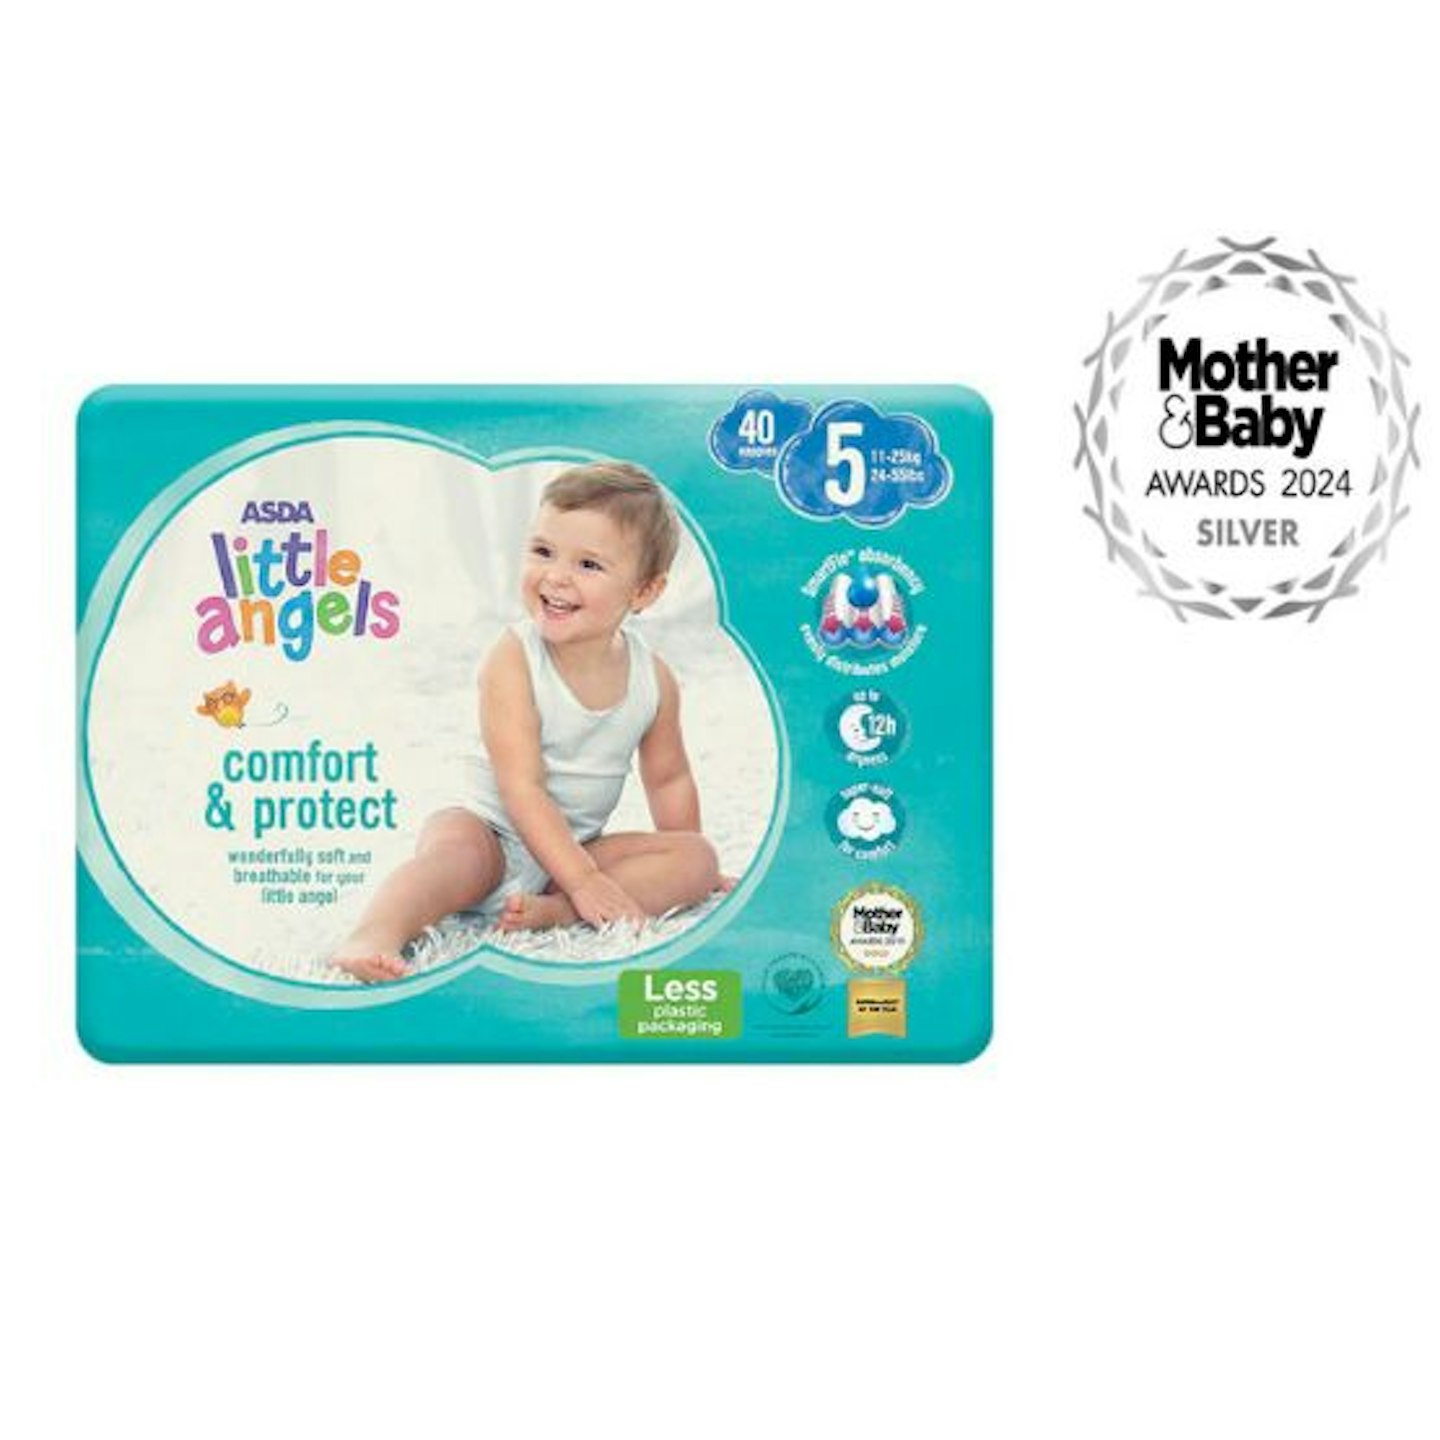 ASDA Little Angels Comfort & Protect Nappies